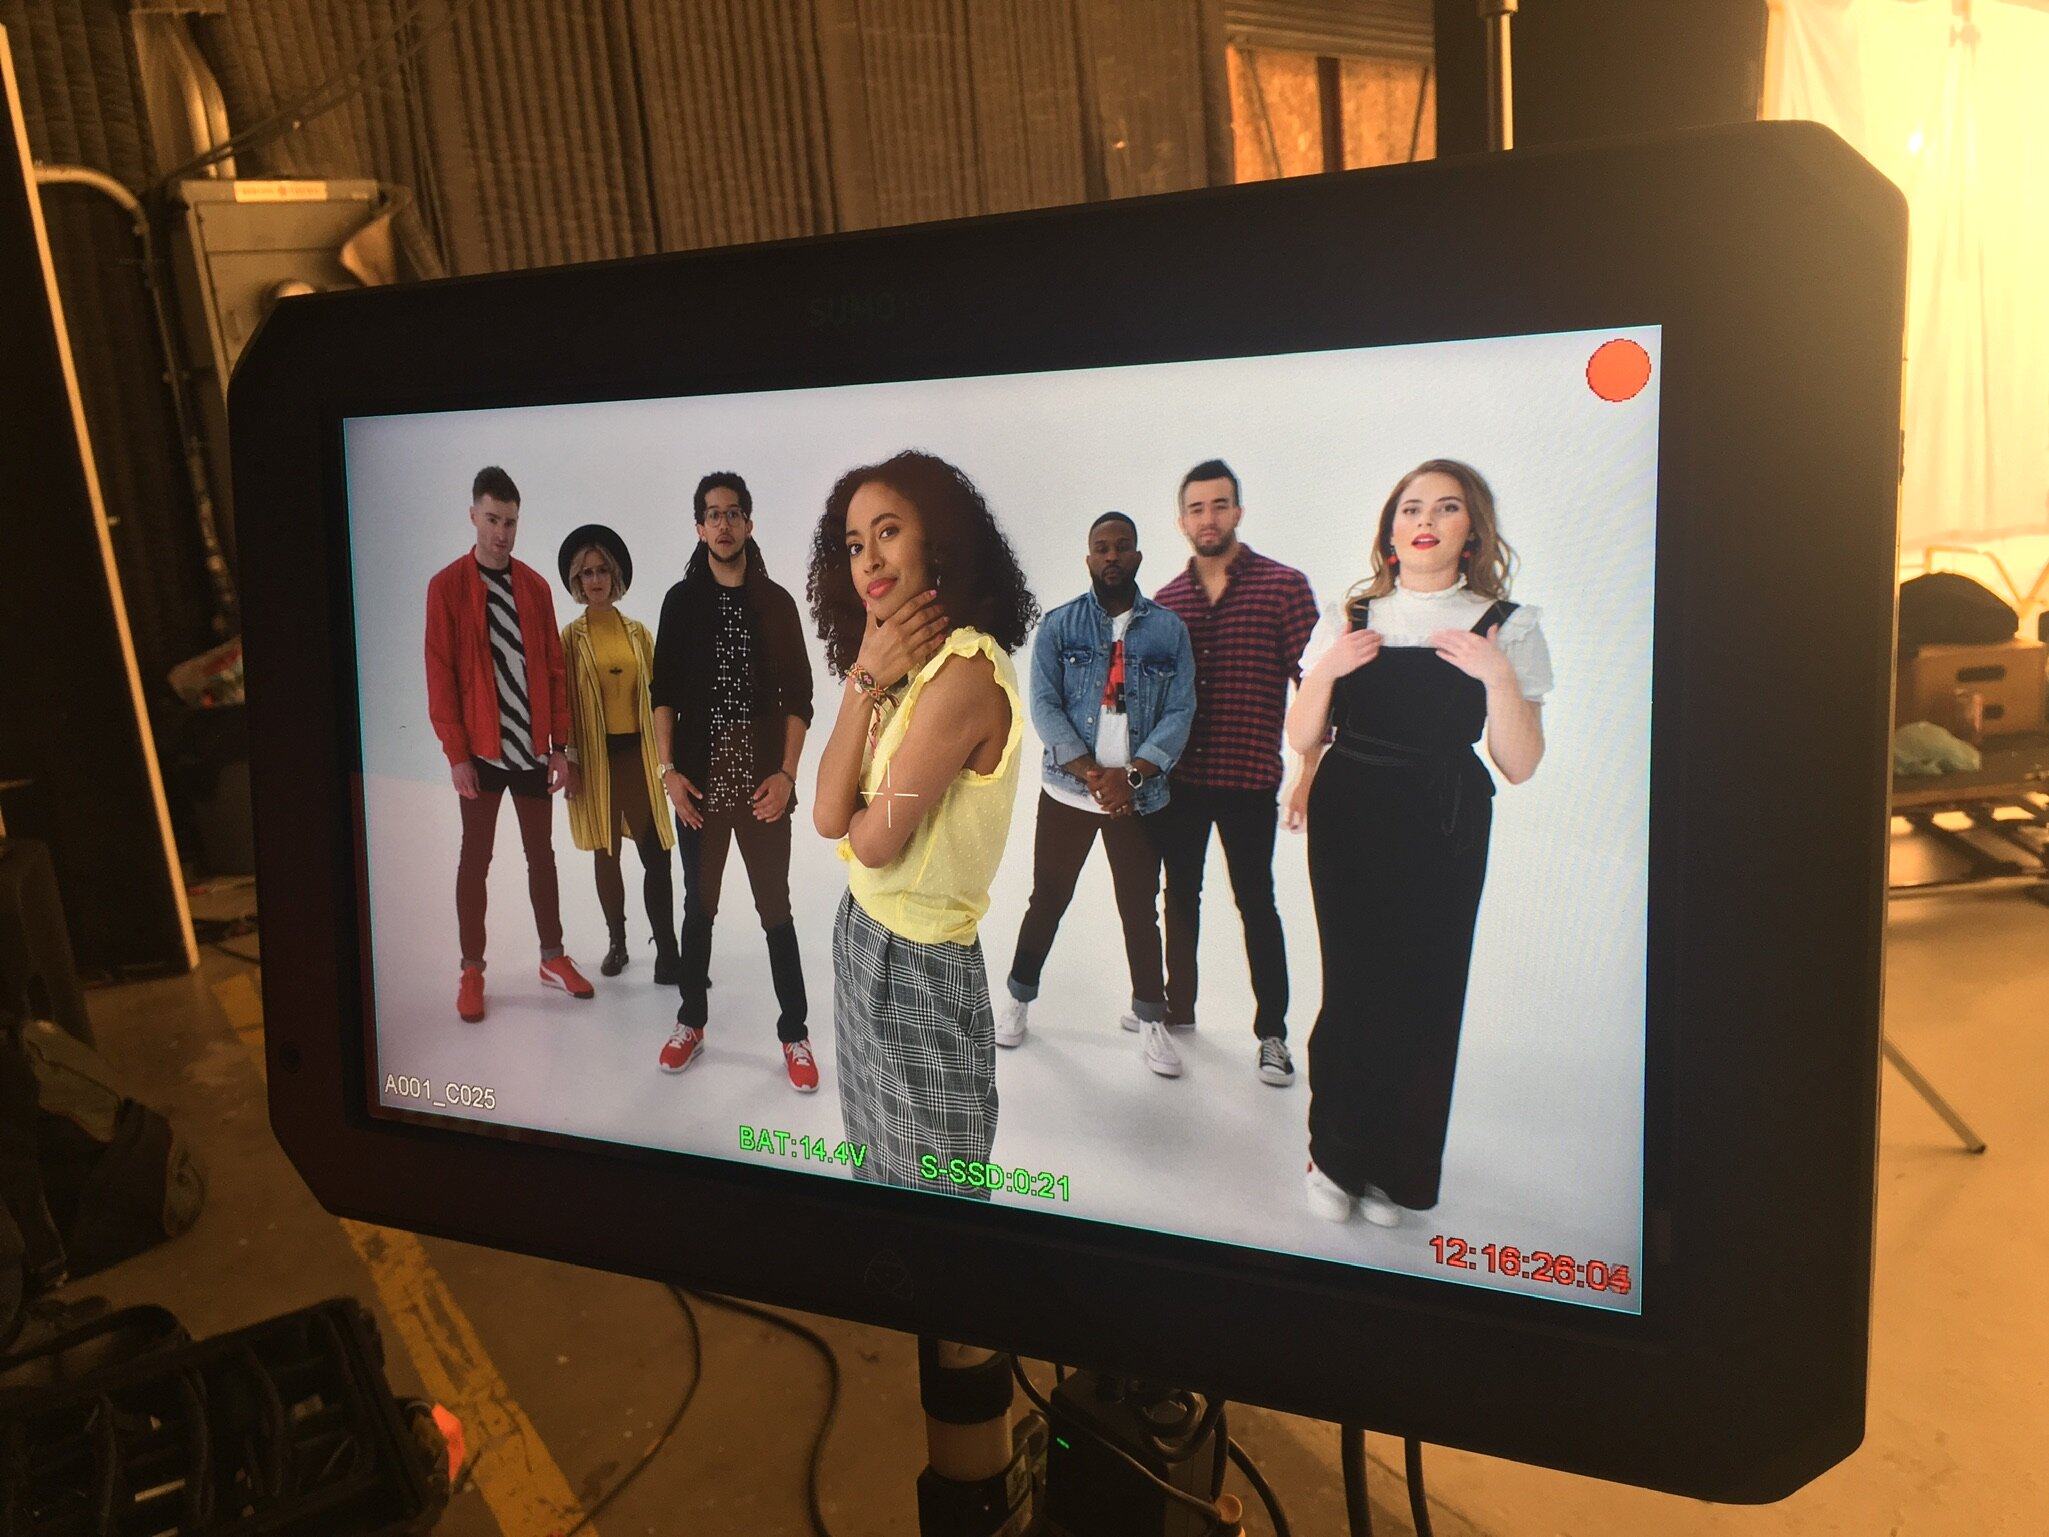  Office Depot x Walt Disney Records “Ready For This” music video 